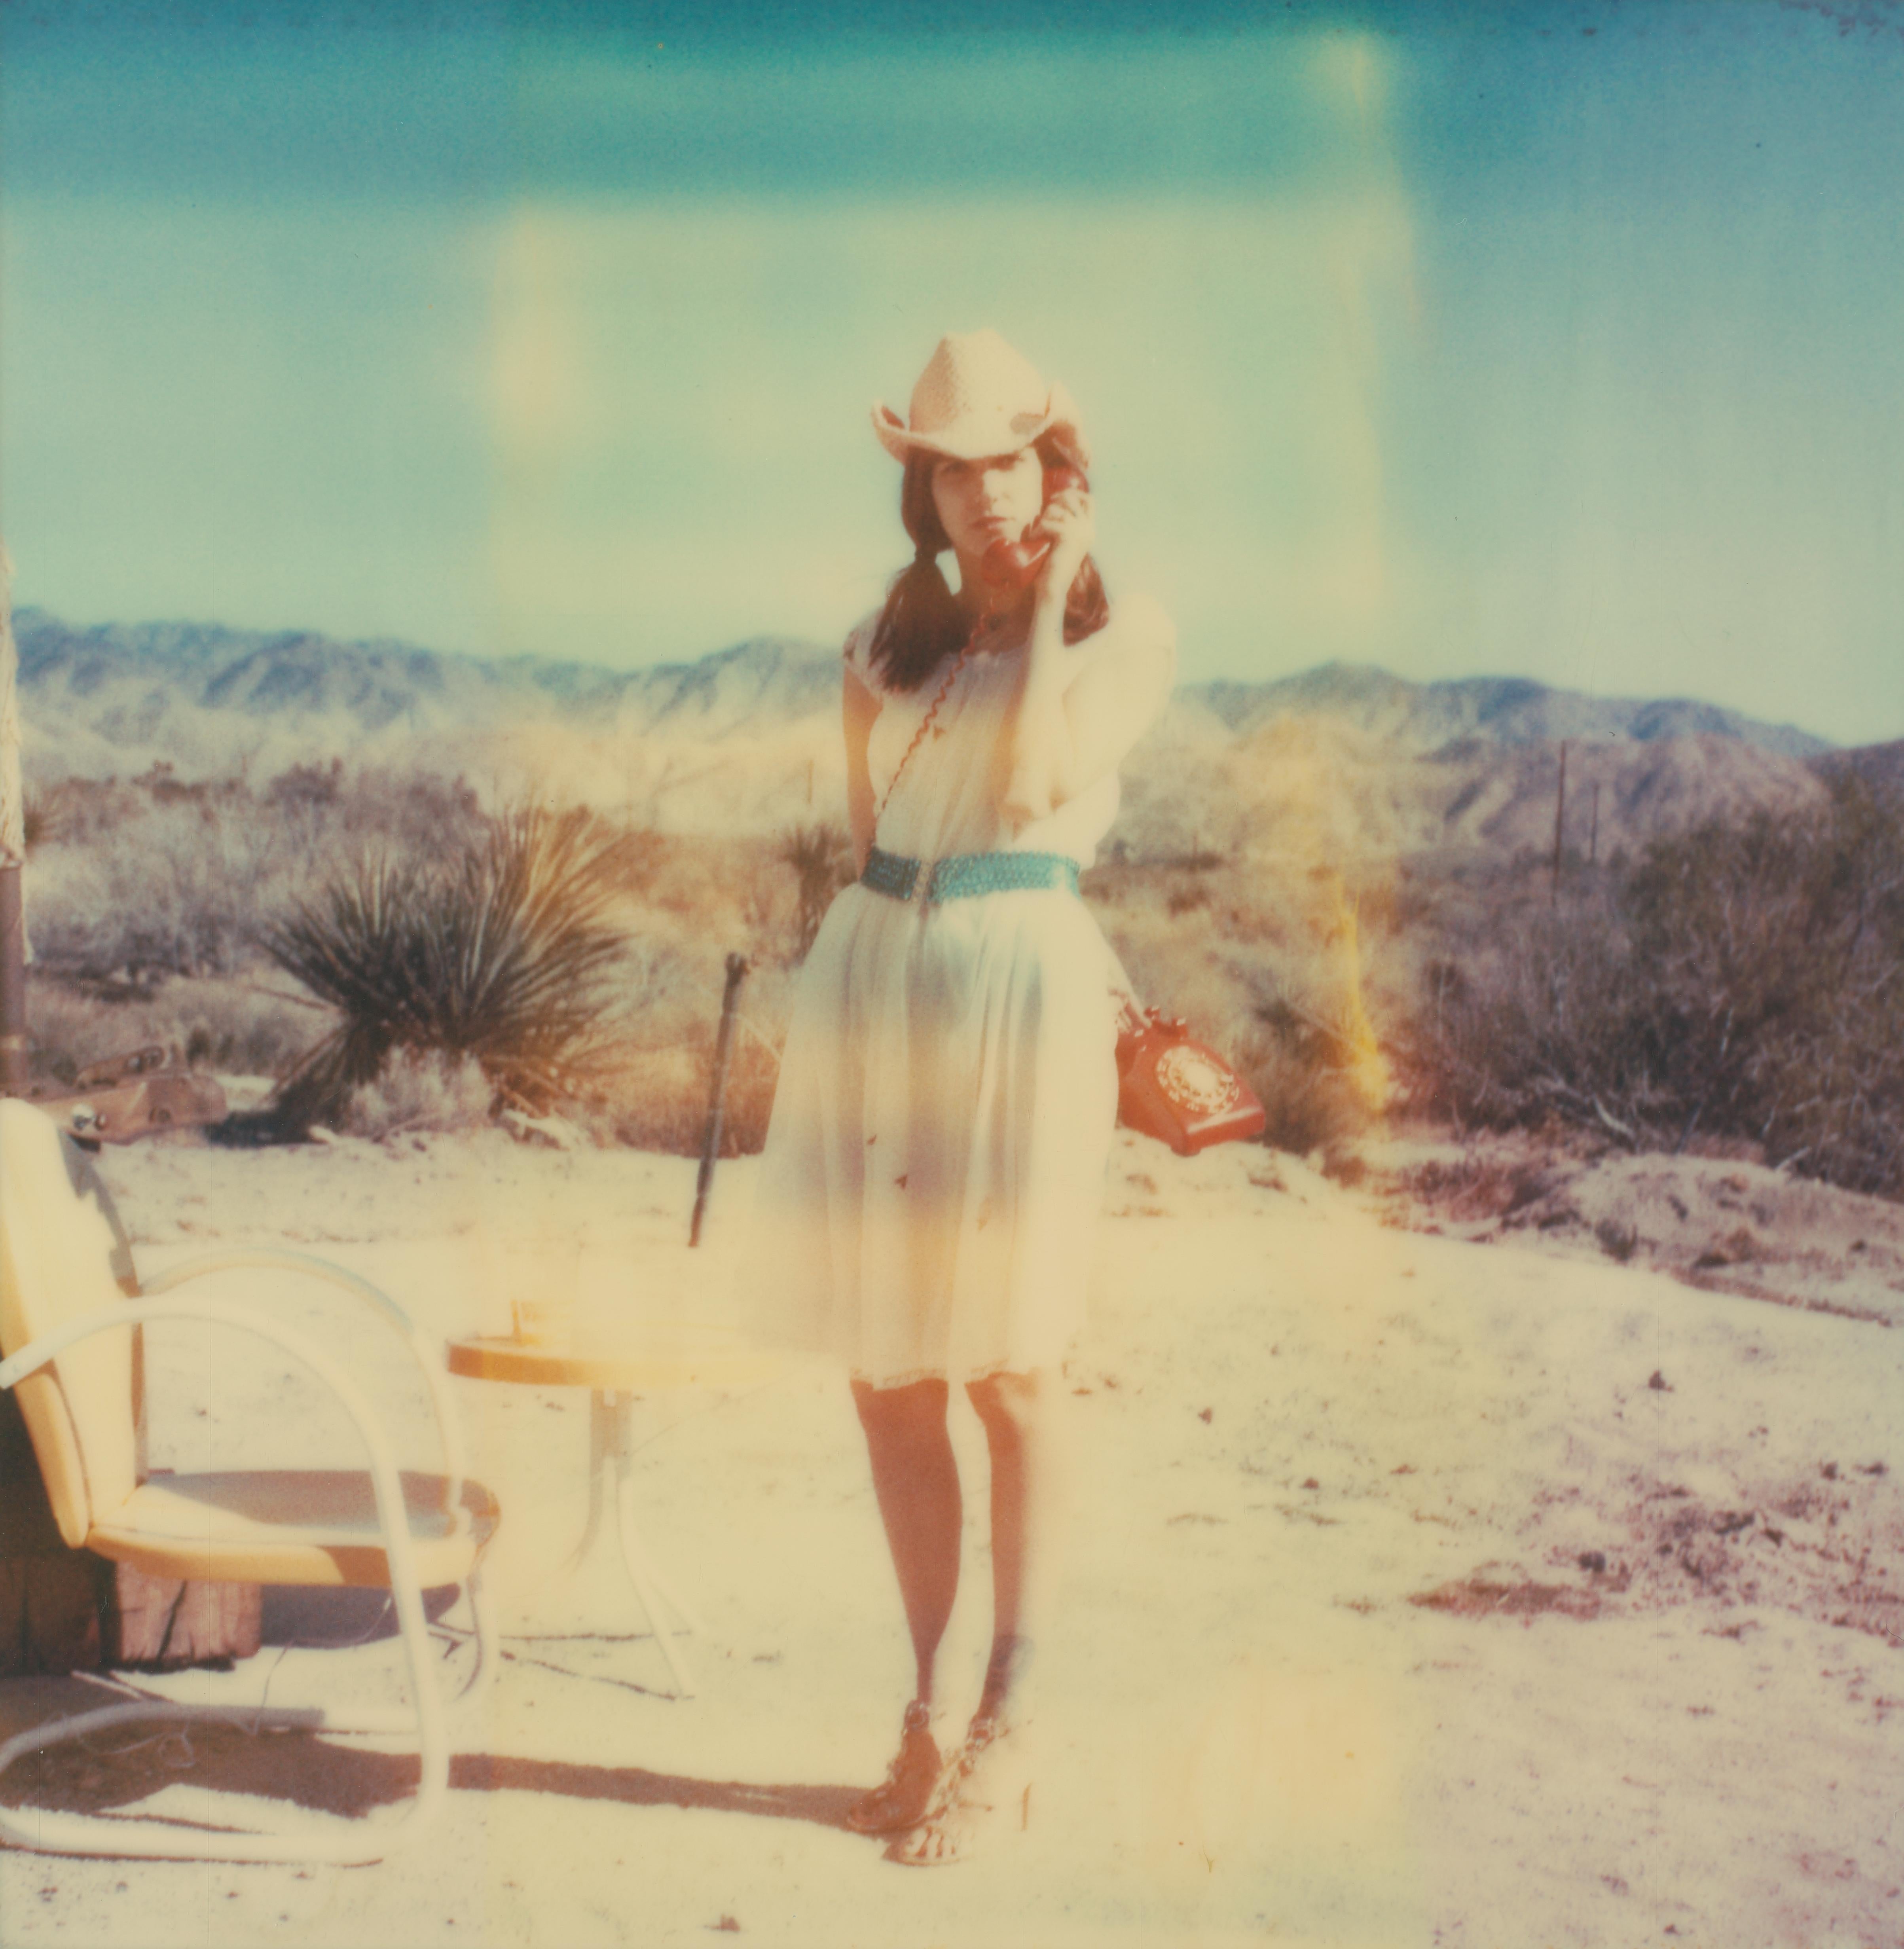 Memories of Love III (The Girl behind the White Picket Fence) - Polaroid, Color